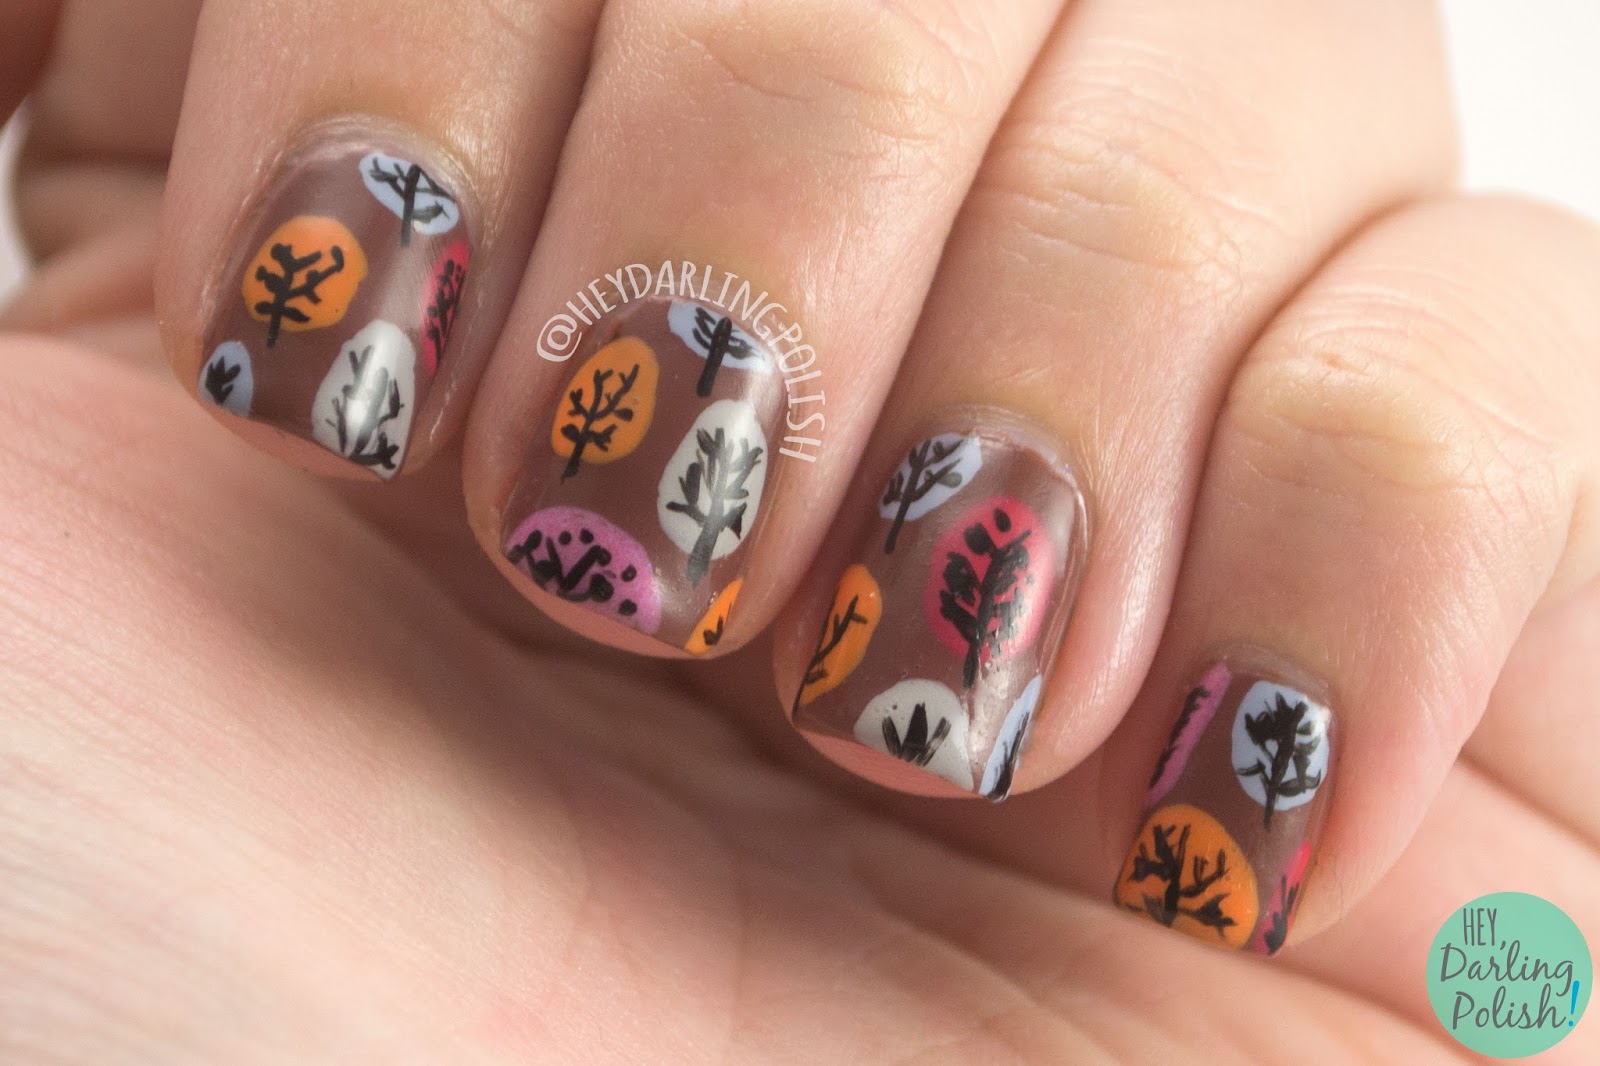 5. Nail Art for Autumn - wide 3